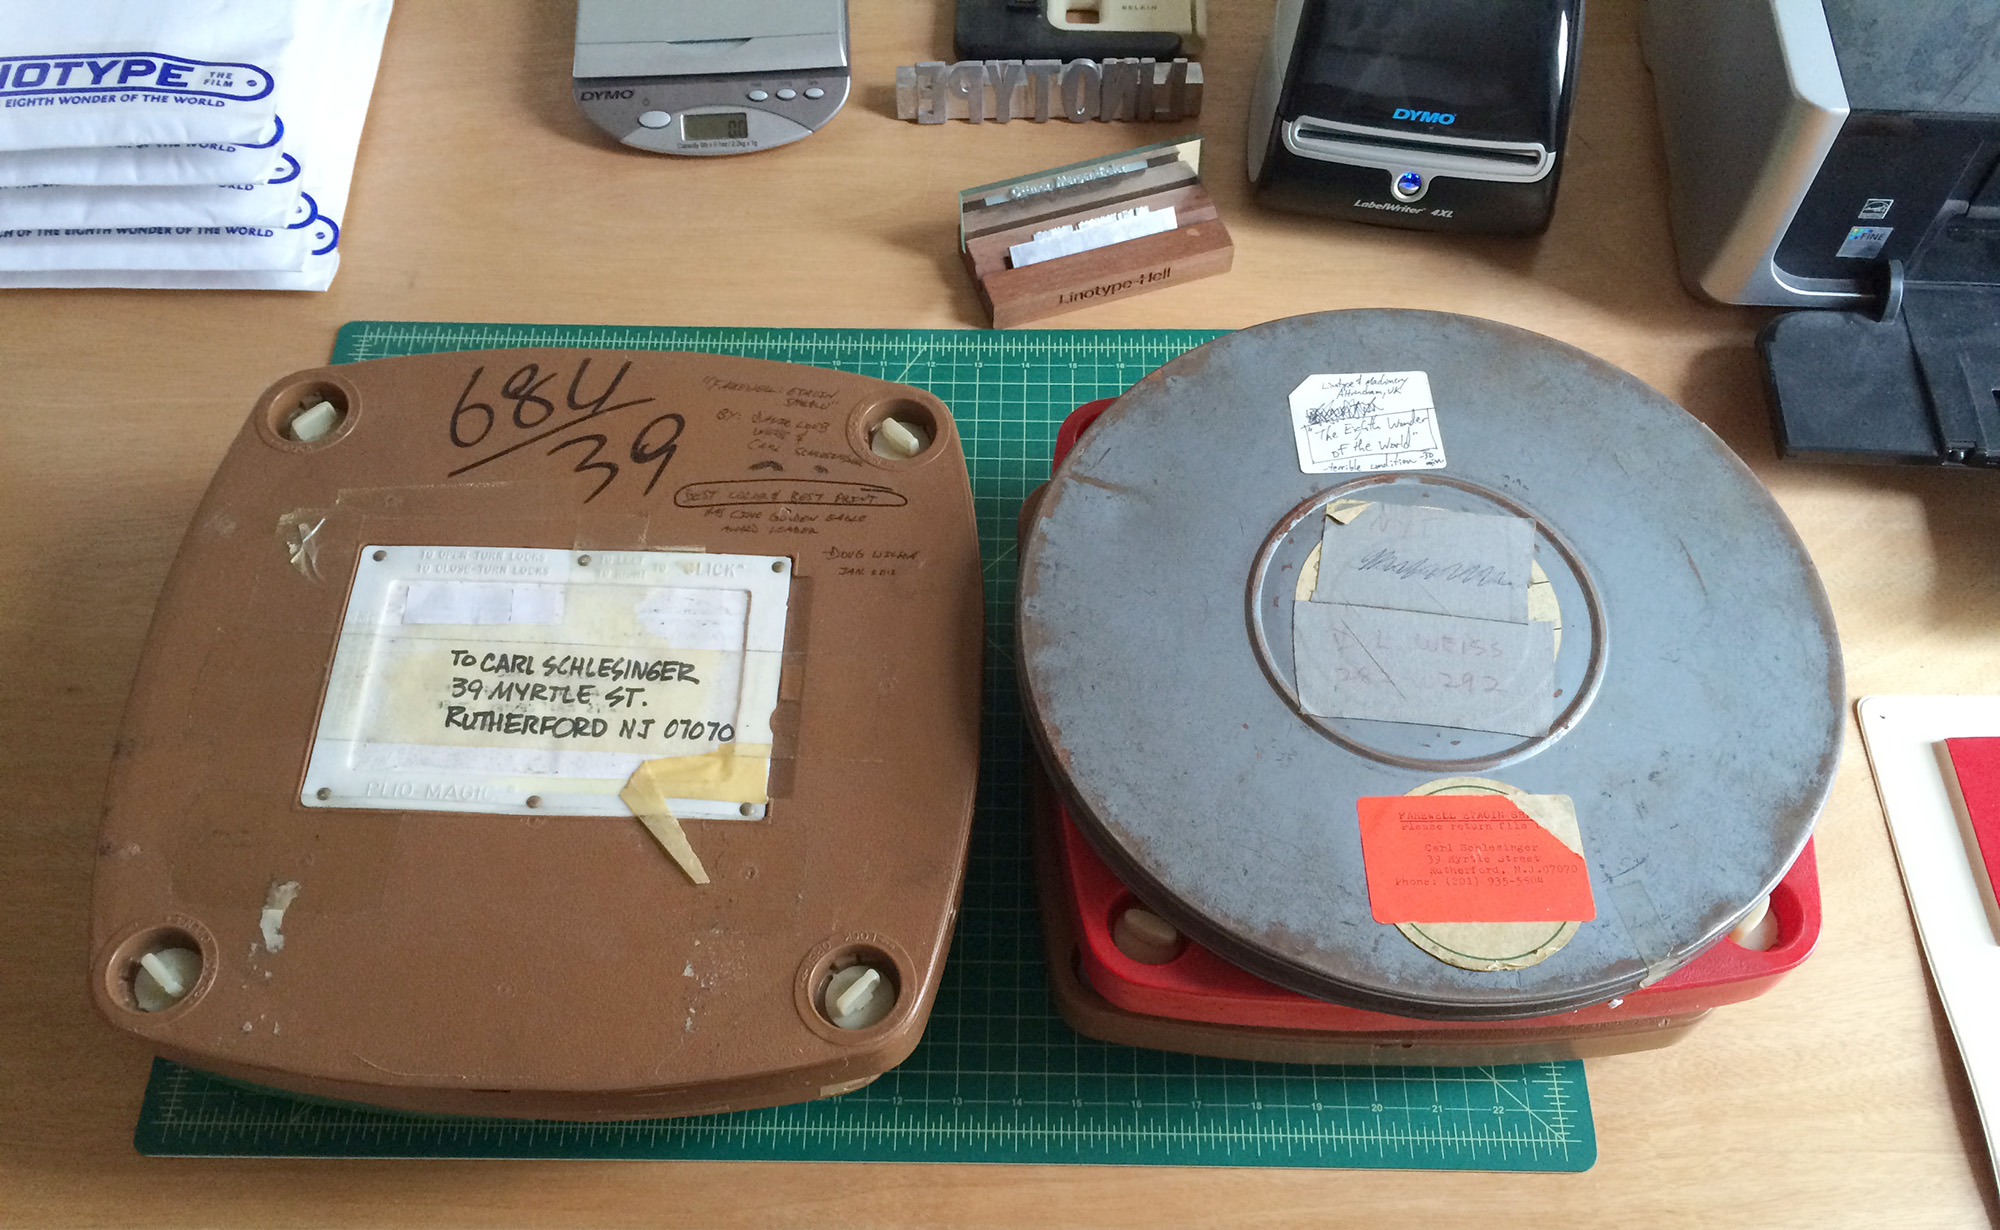 Organizing films donated by Carl Schlesinger